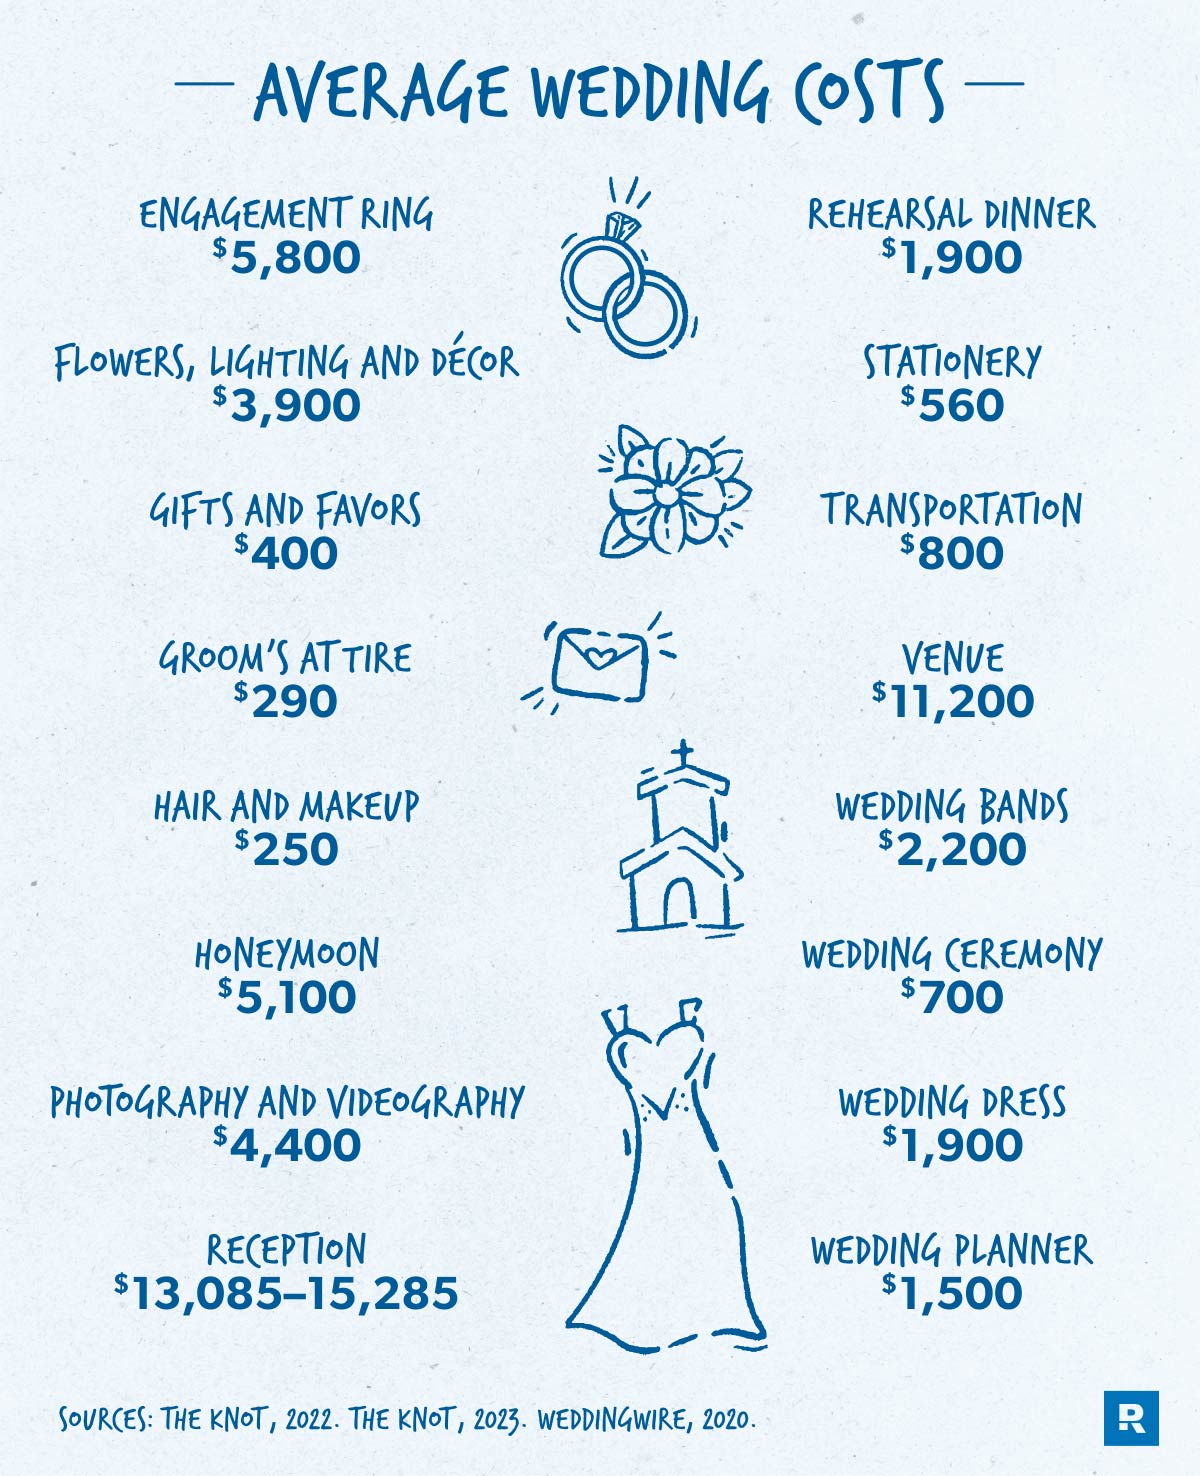 How Much Does A Wedding Dress Really Cost?